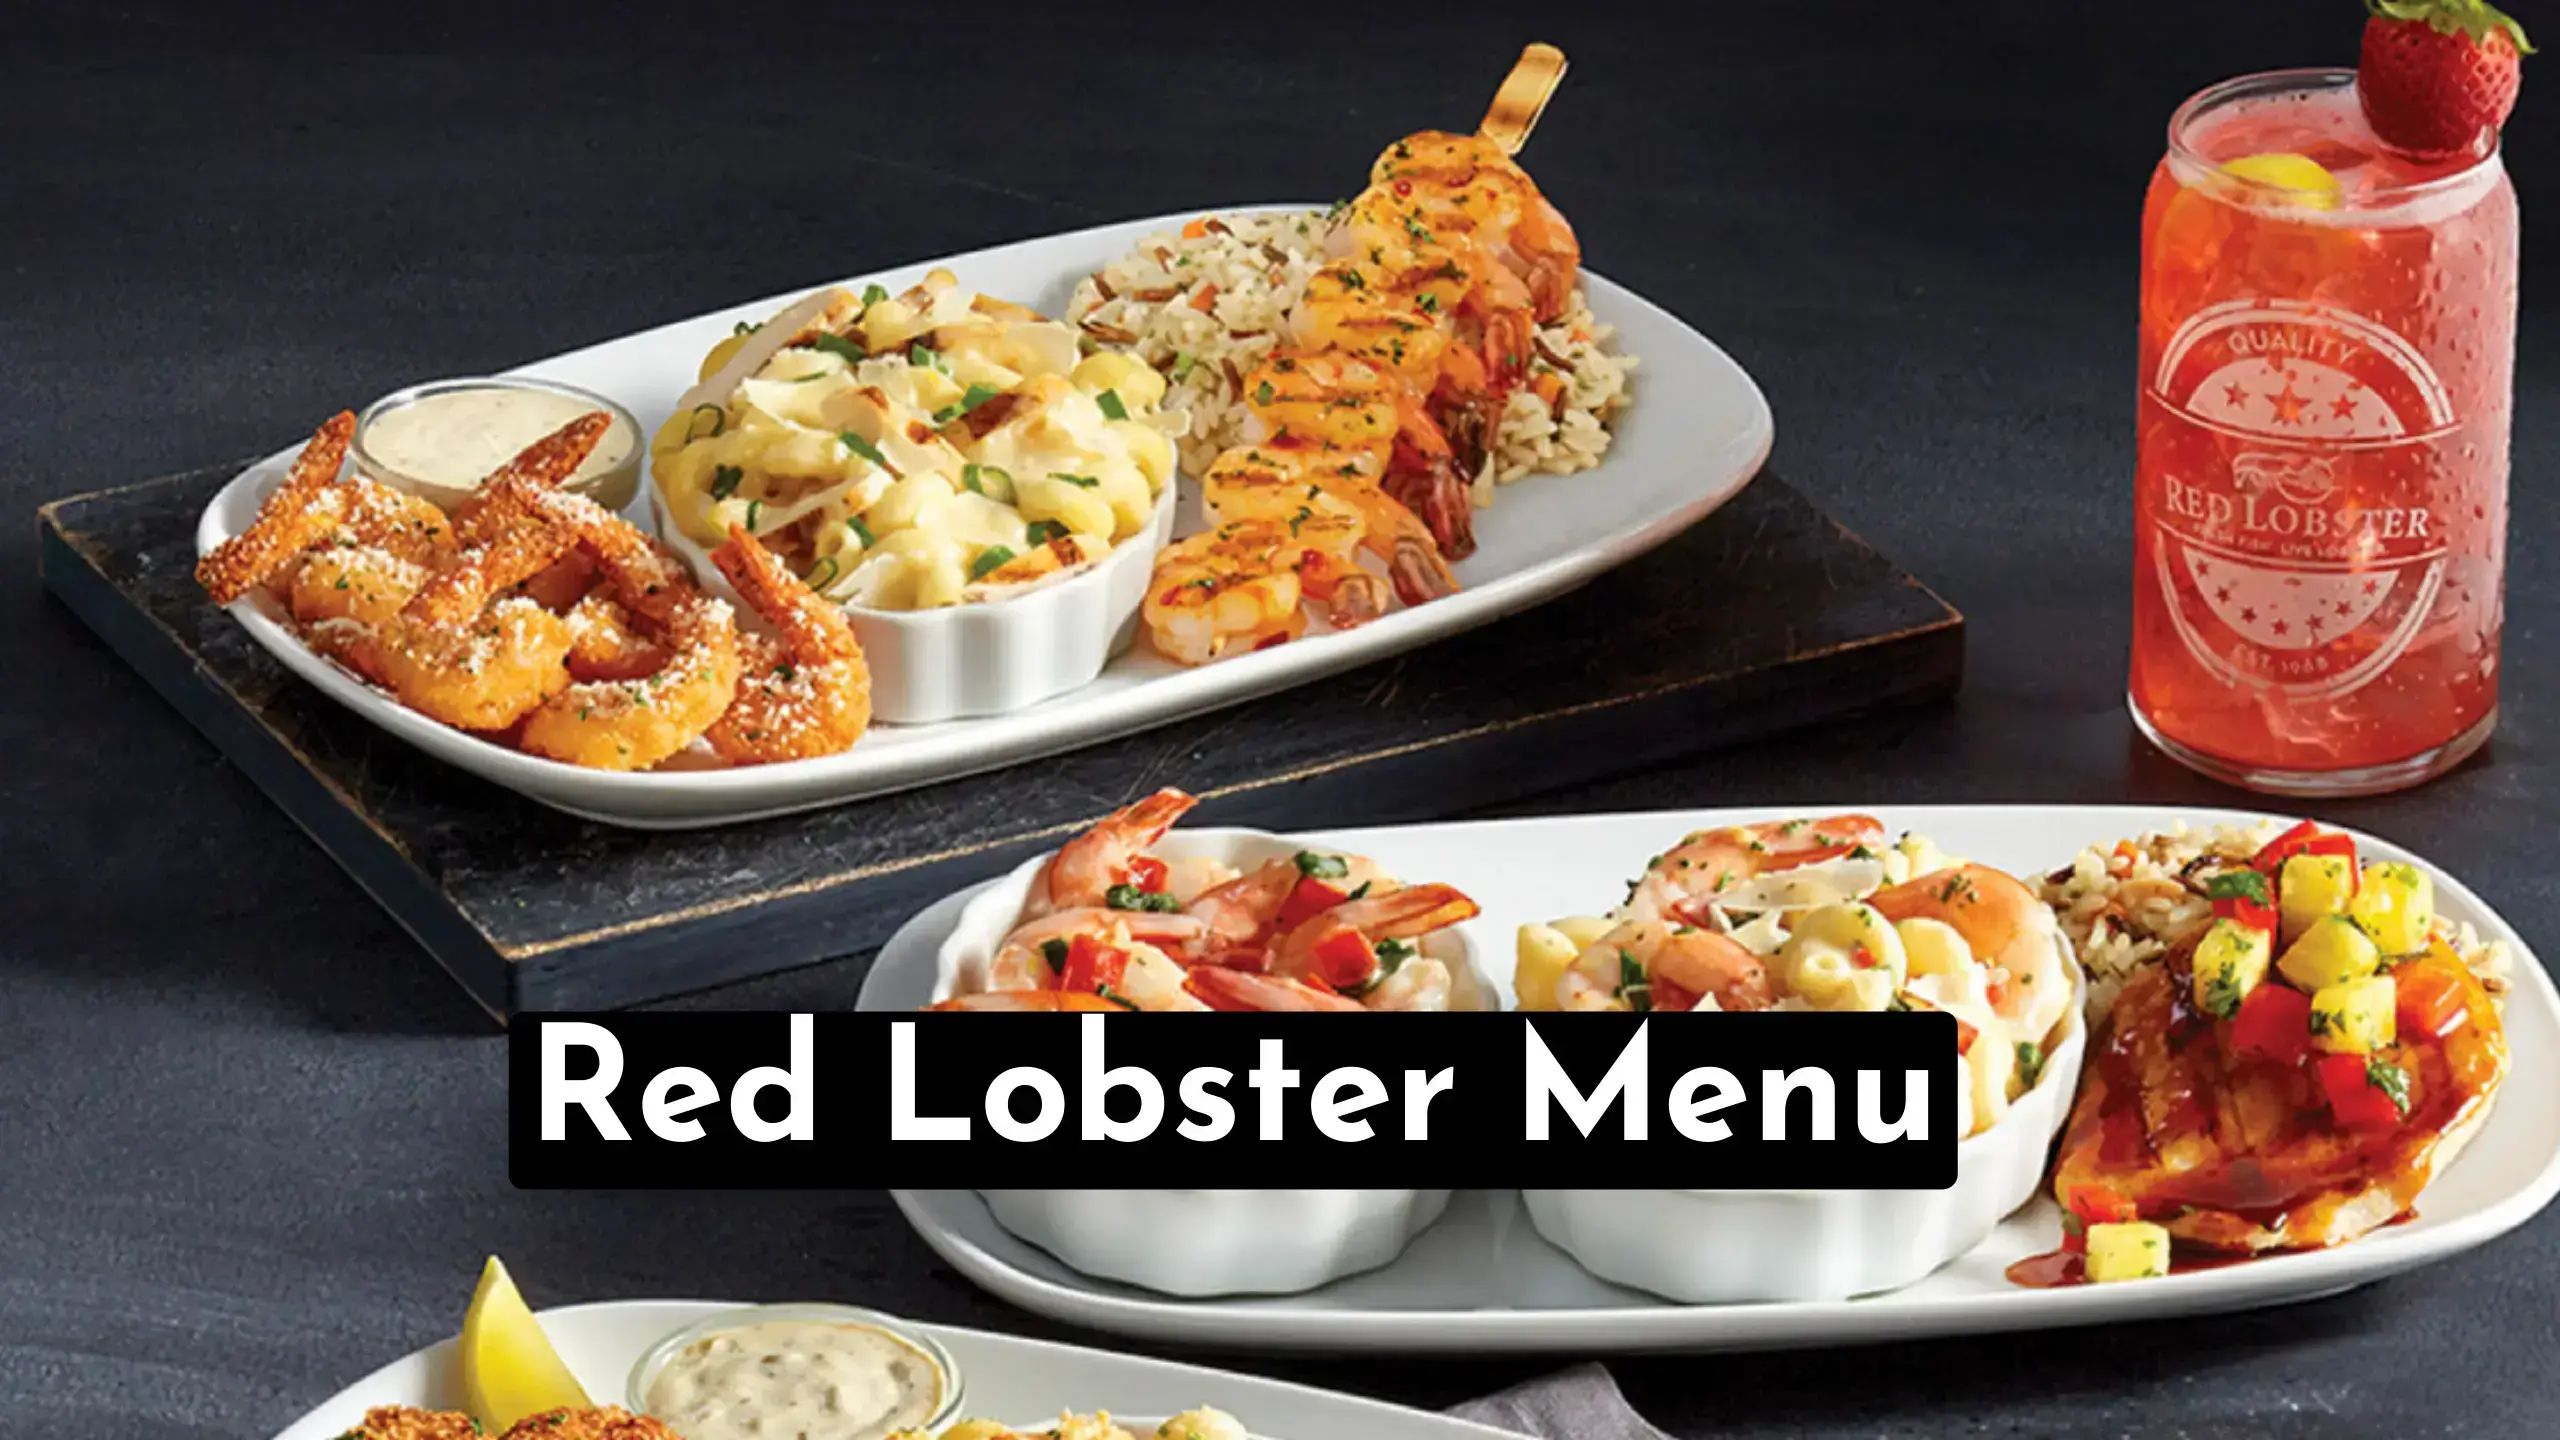 A Quick Guide To Discover Red Lobster Menu Dishes With Its Specific Prices | Also Quickly Find Red Lobster Dinner, Lunch, Drink & Kids Menu.